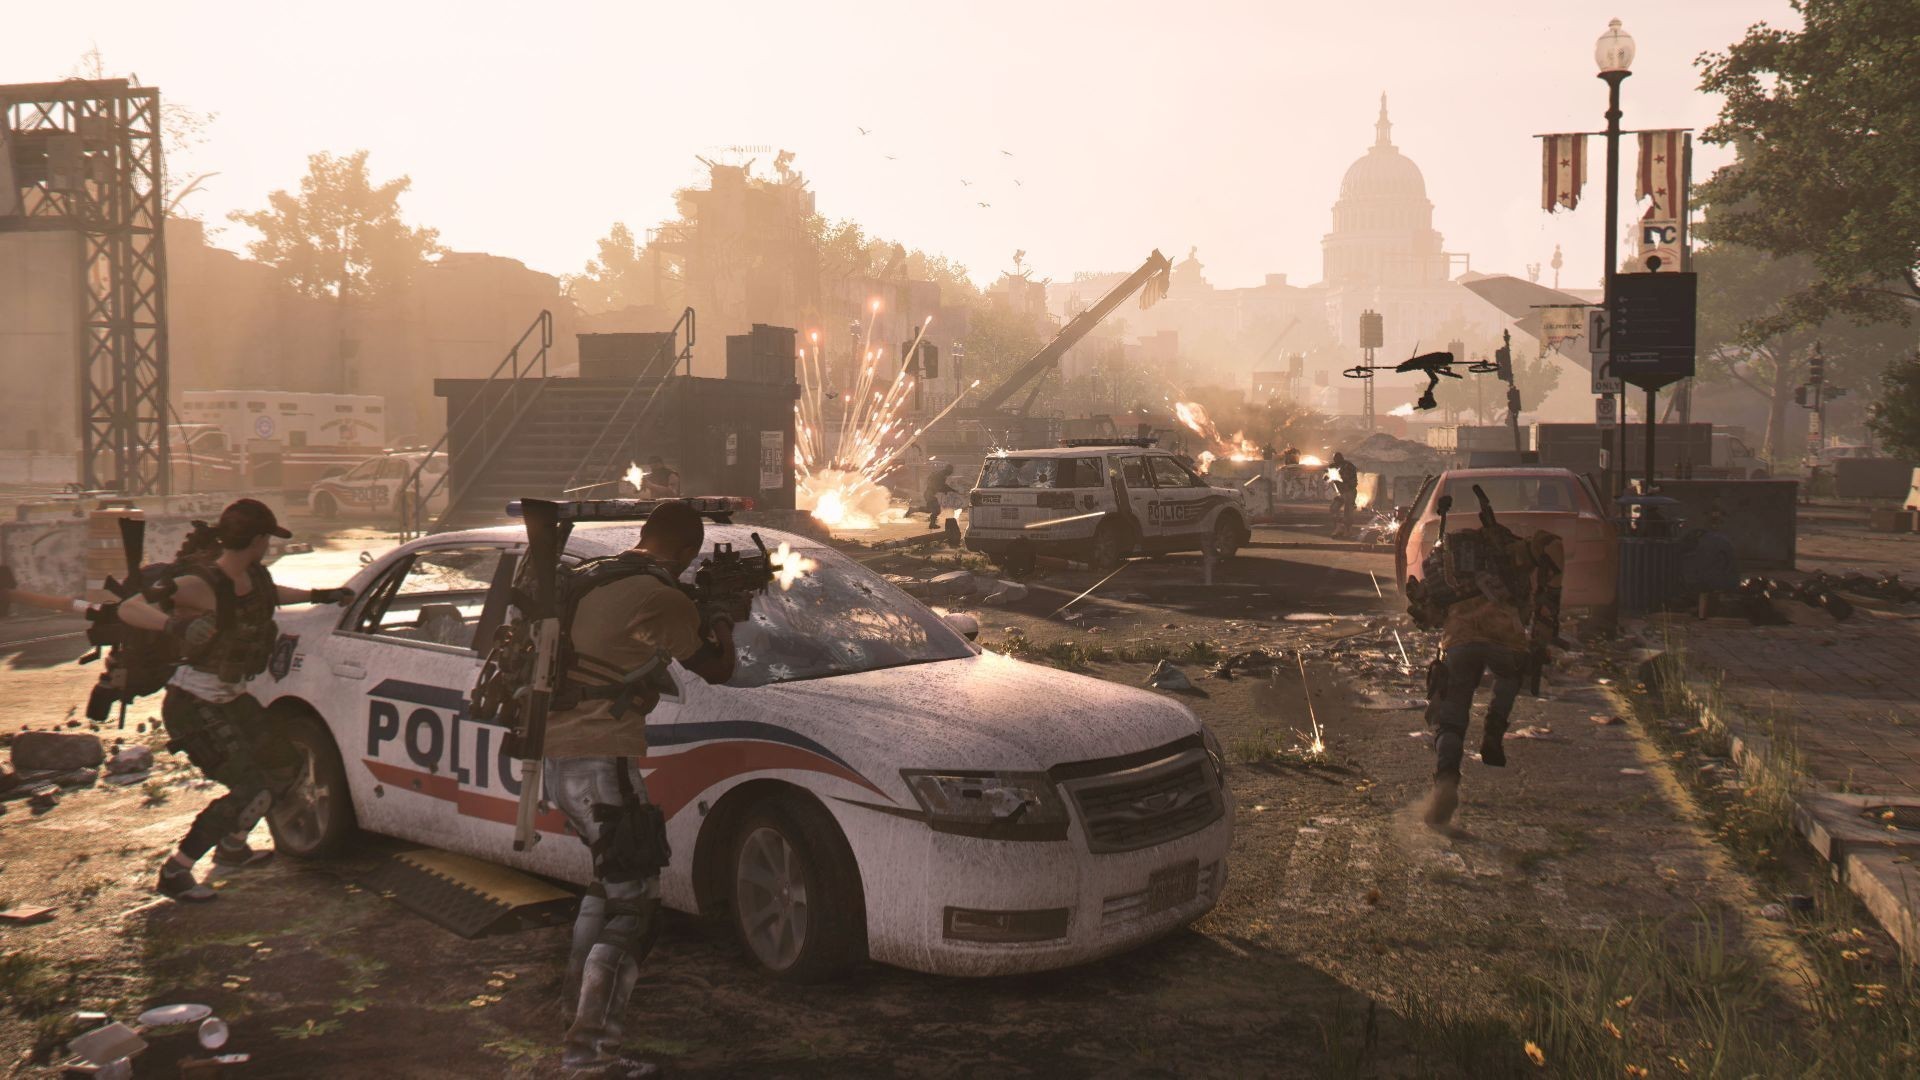 Buy The Division 2 Gold Edition Uplay